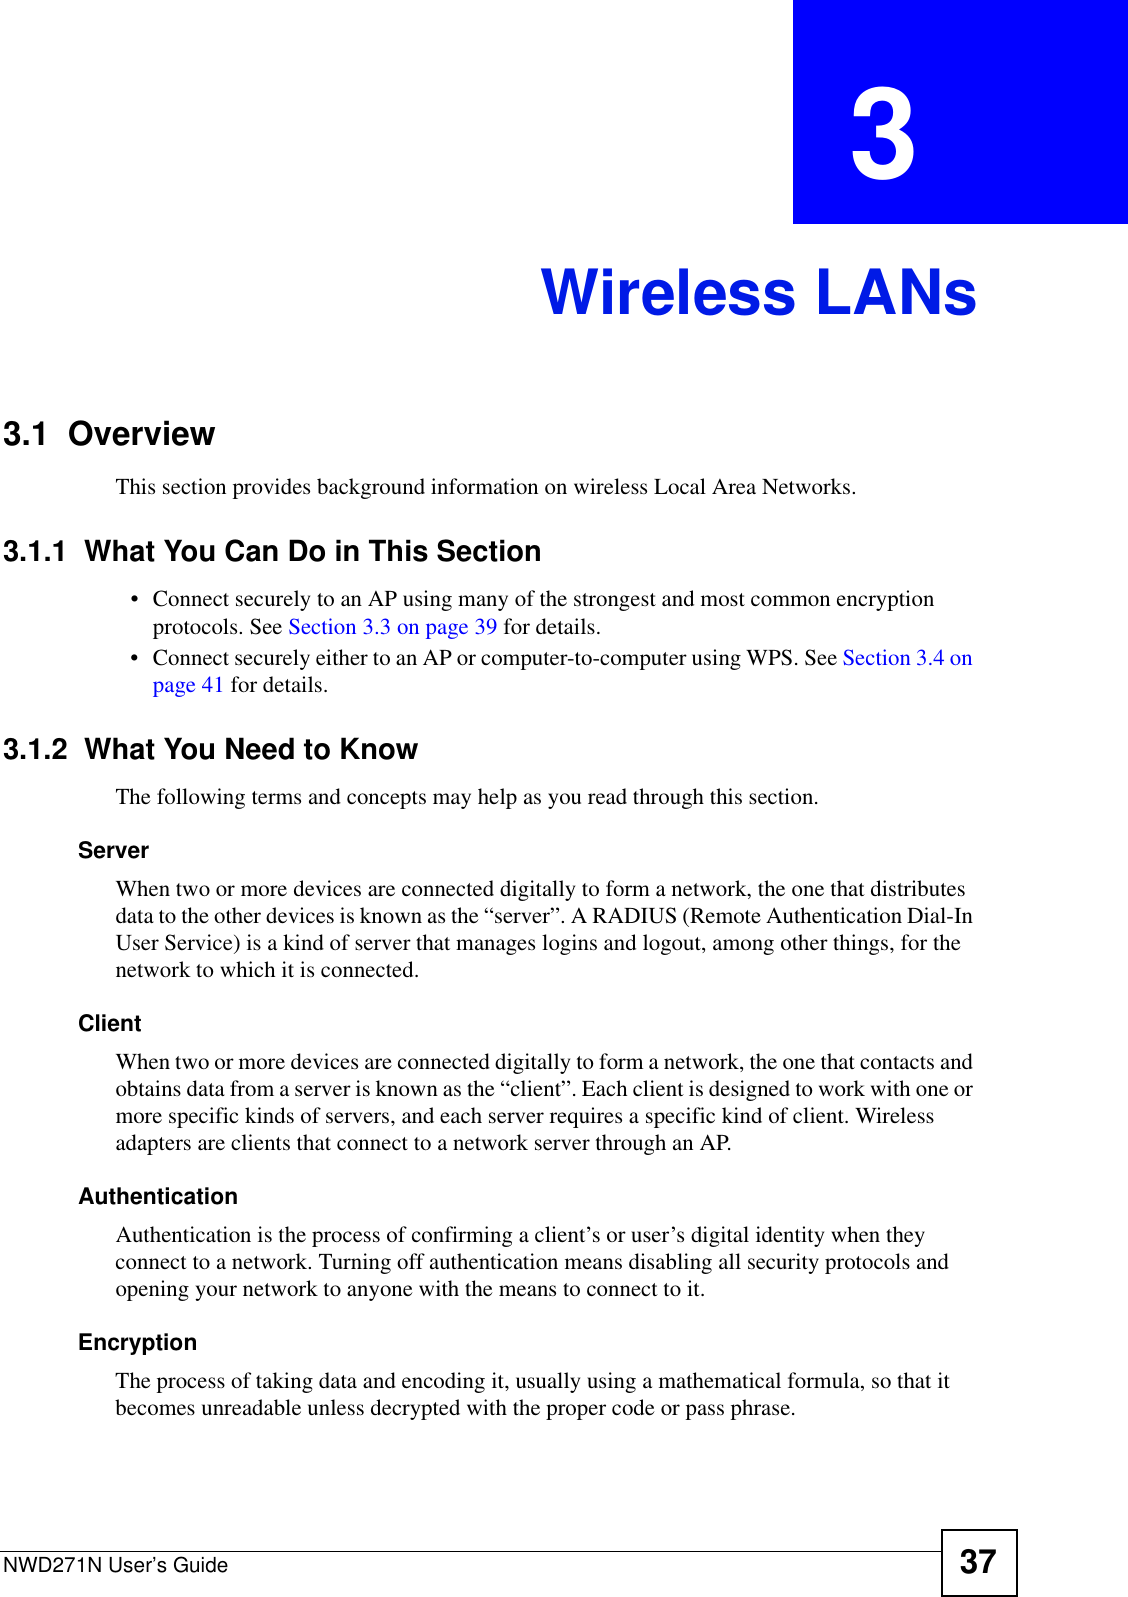 NWD271N User’s Guide 37CHAPTER  3 Wireless LANs3.1  OverviewThis section provides background information on wireless Local Area Networks.3.1.1  What You Can Do in This Section• Connect securely to an AP using many of the strongest and most common encryption protocols. See Section 3.3 on page 39 for details.• Connect securely either to an AP or computer-to-computer using WPS. See Section 3.4 on page 41 for details.3.1.2  What You Need to KnowThe following terms and concepts may help as you read through this section.ServerWhen two or more devices are connected digitally to form a network, the one that distributes data to the other devices is known as the “server”. A RADIUS (Remote Authentication Dial-In User Service) is a kind of server that manages logins and logout, among other things, for the network to which it is connected.ClientWhen two or more devices are connected digitally to form a network, the one that contacts and obtains data from a server is known as the “client”. Each client is designed to work with one or more specific kinds of servers, and each server requires a specific kind of client. Wireless adapters are clients that connect to a network server through an AP.AuthenticationAuthentication is the process of confirming a client’s or user’s digital identity when they connect to a network. Turning off authentication means disabling all security protocols and opening your network to anyone with the means to connect to it.EncryptionThe process of taking data and encoding it, usually using a mathematical formula, so that it becomes unreadable unless decrypted with the proper code or pass phrase.